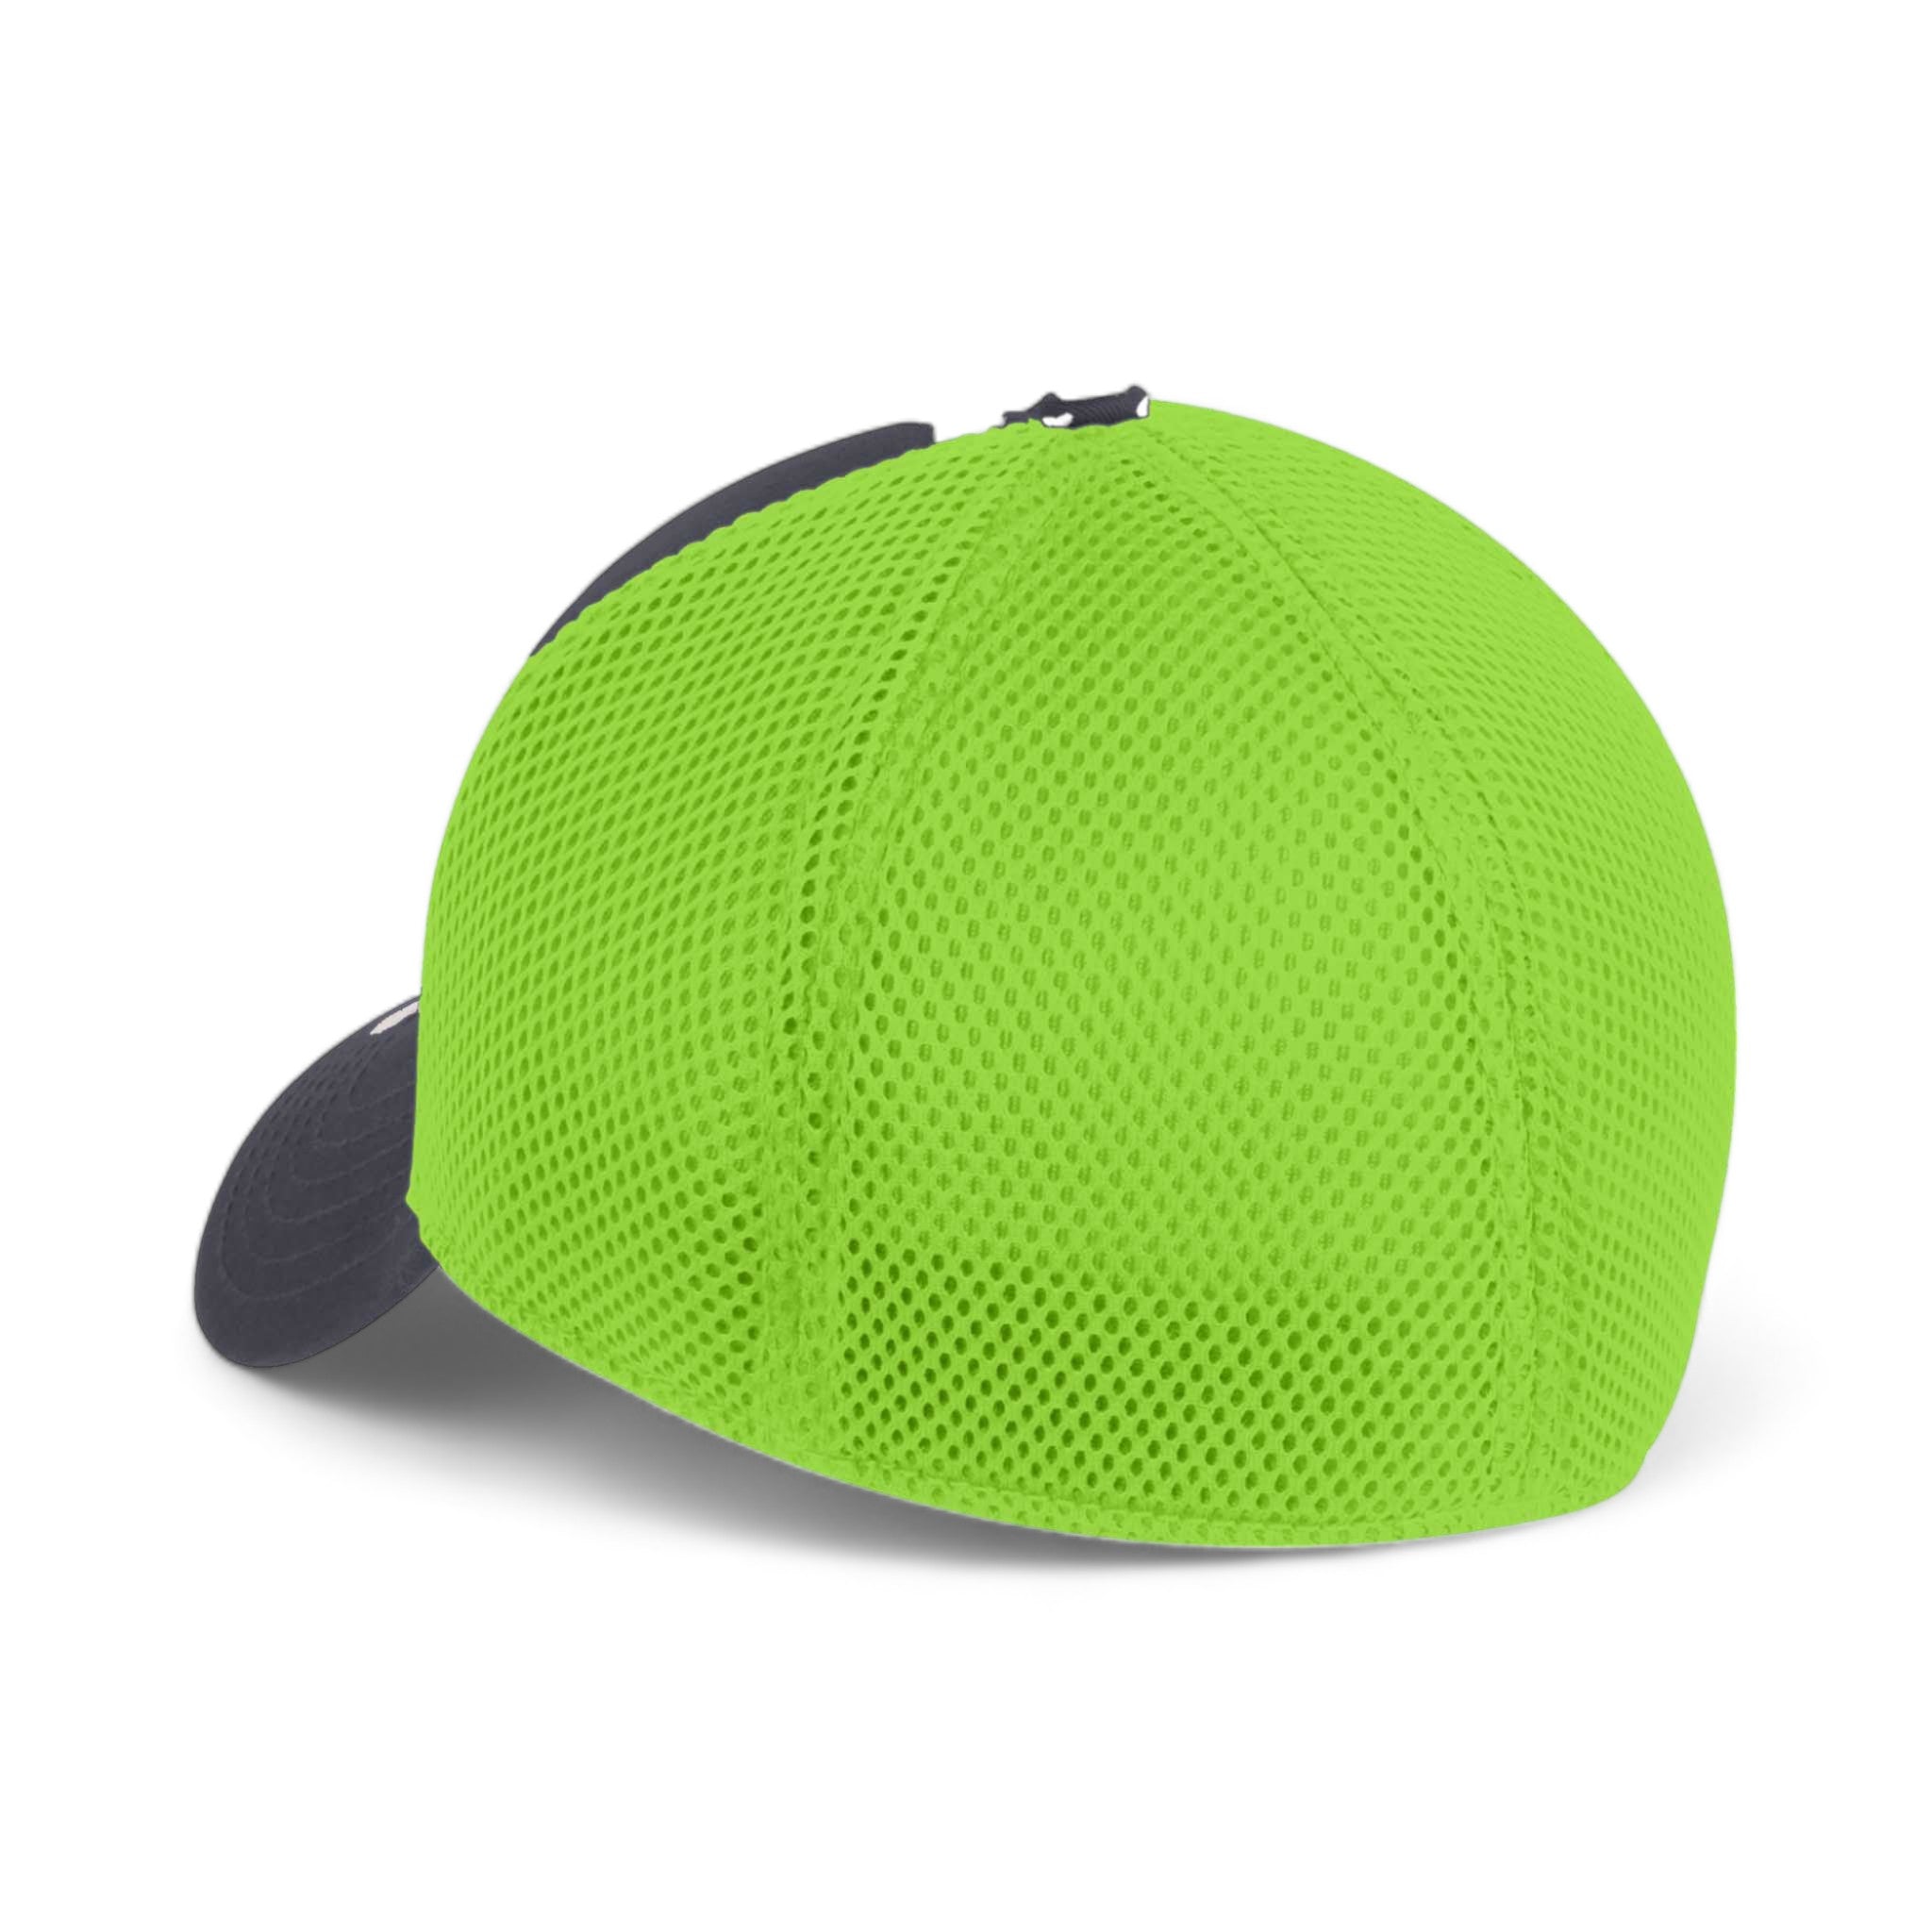 Back view of New Era NE1020 custom hat in graphite and cyber green